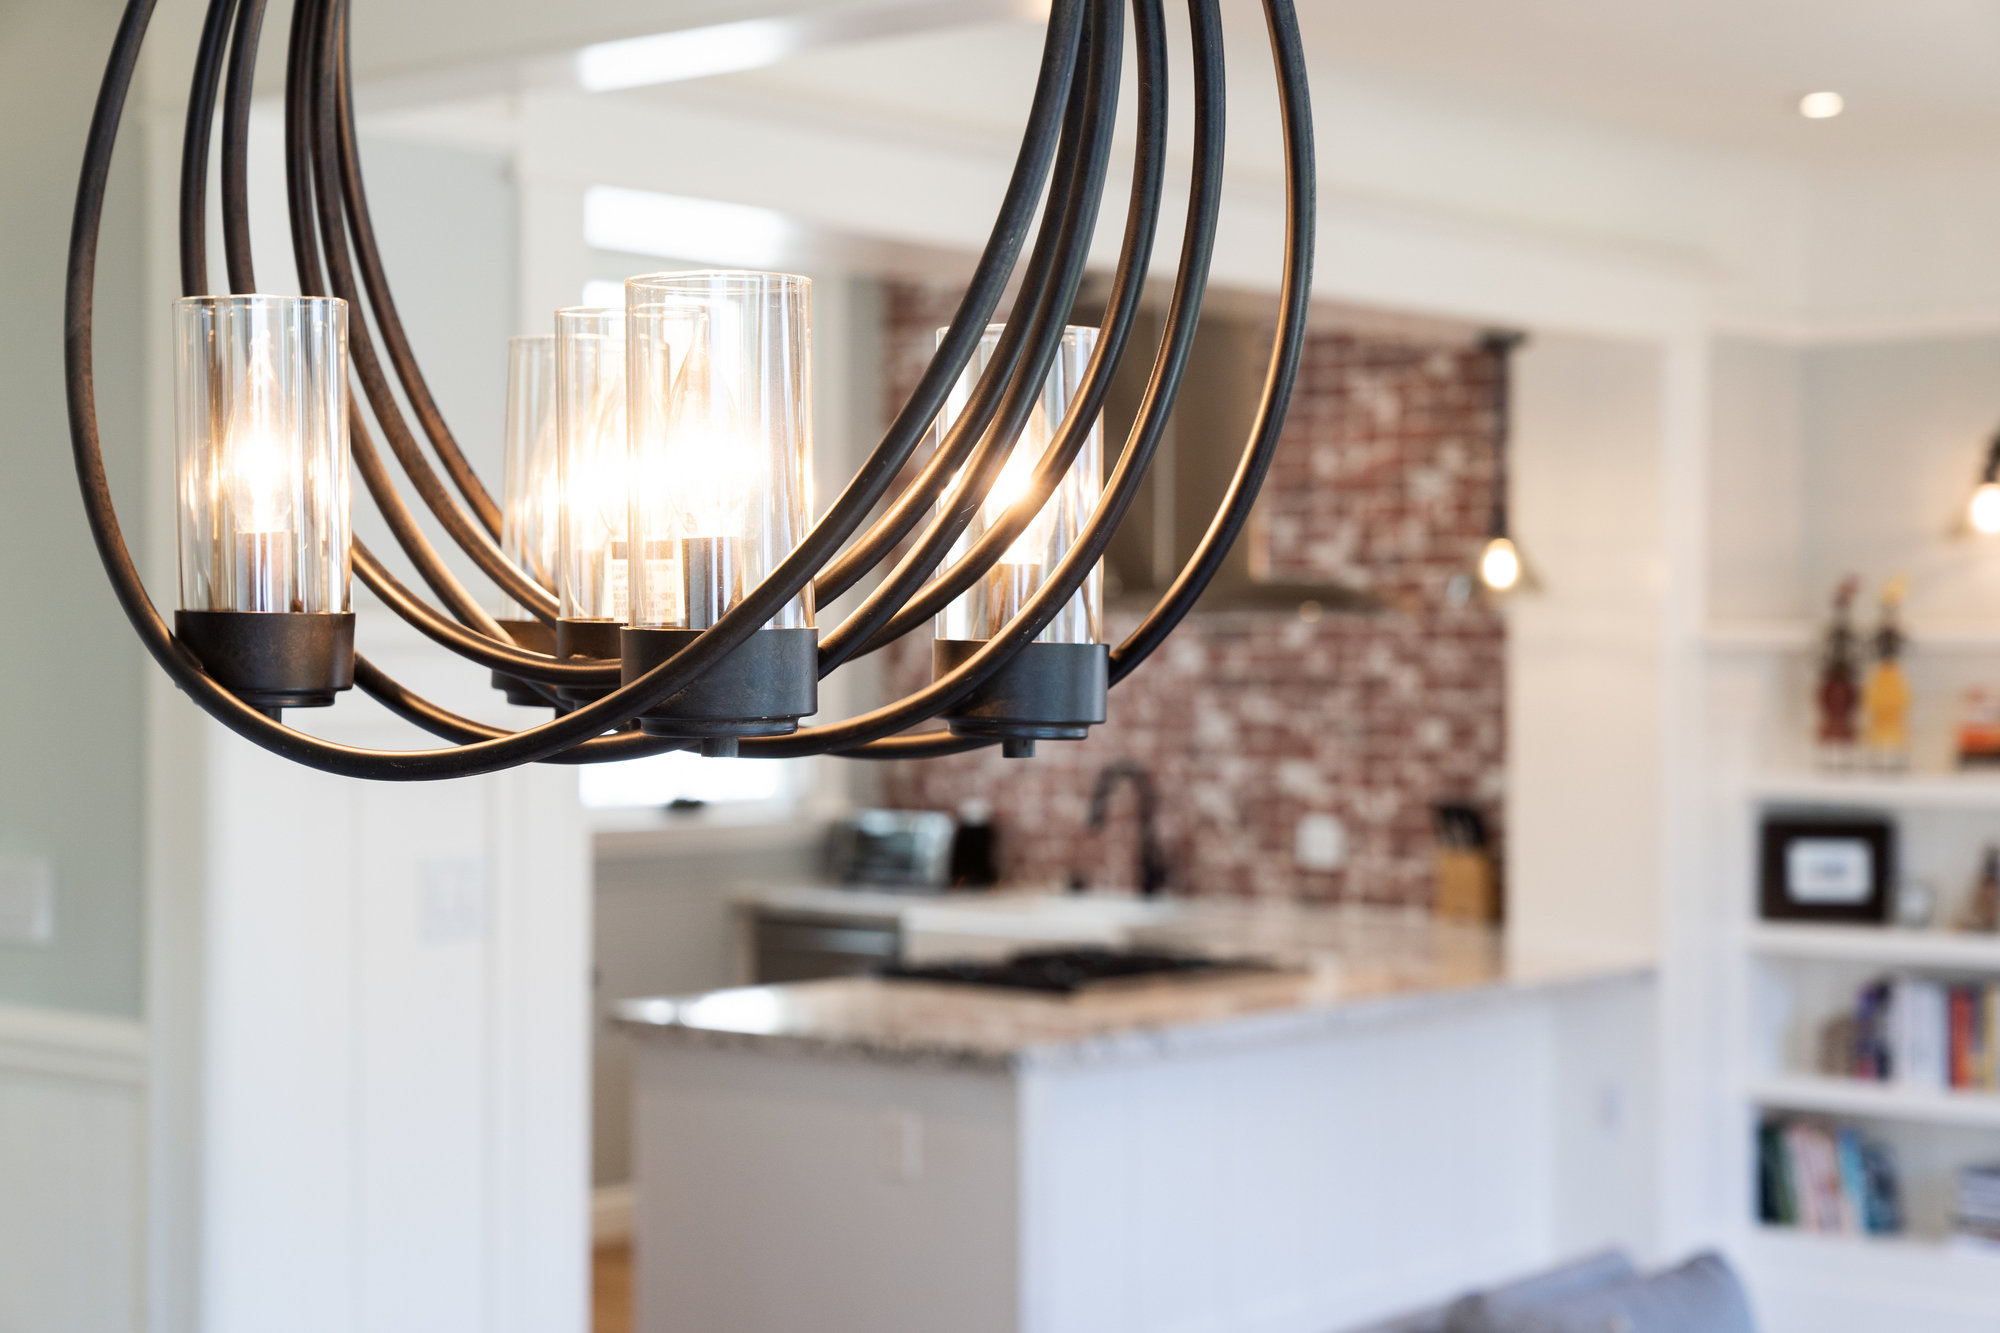 Property Photo: Close-up view of circular light fixture found in the dining room